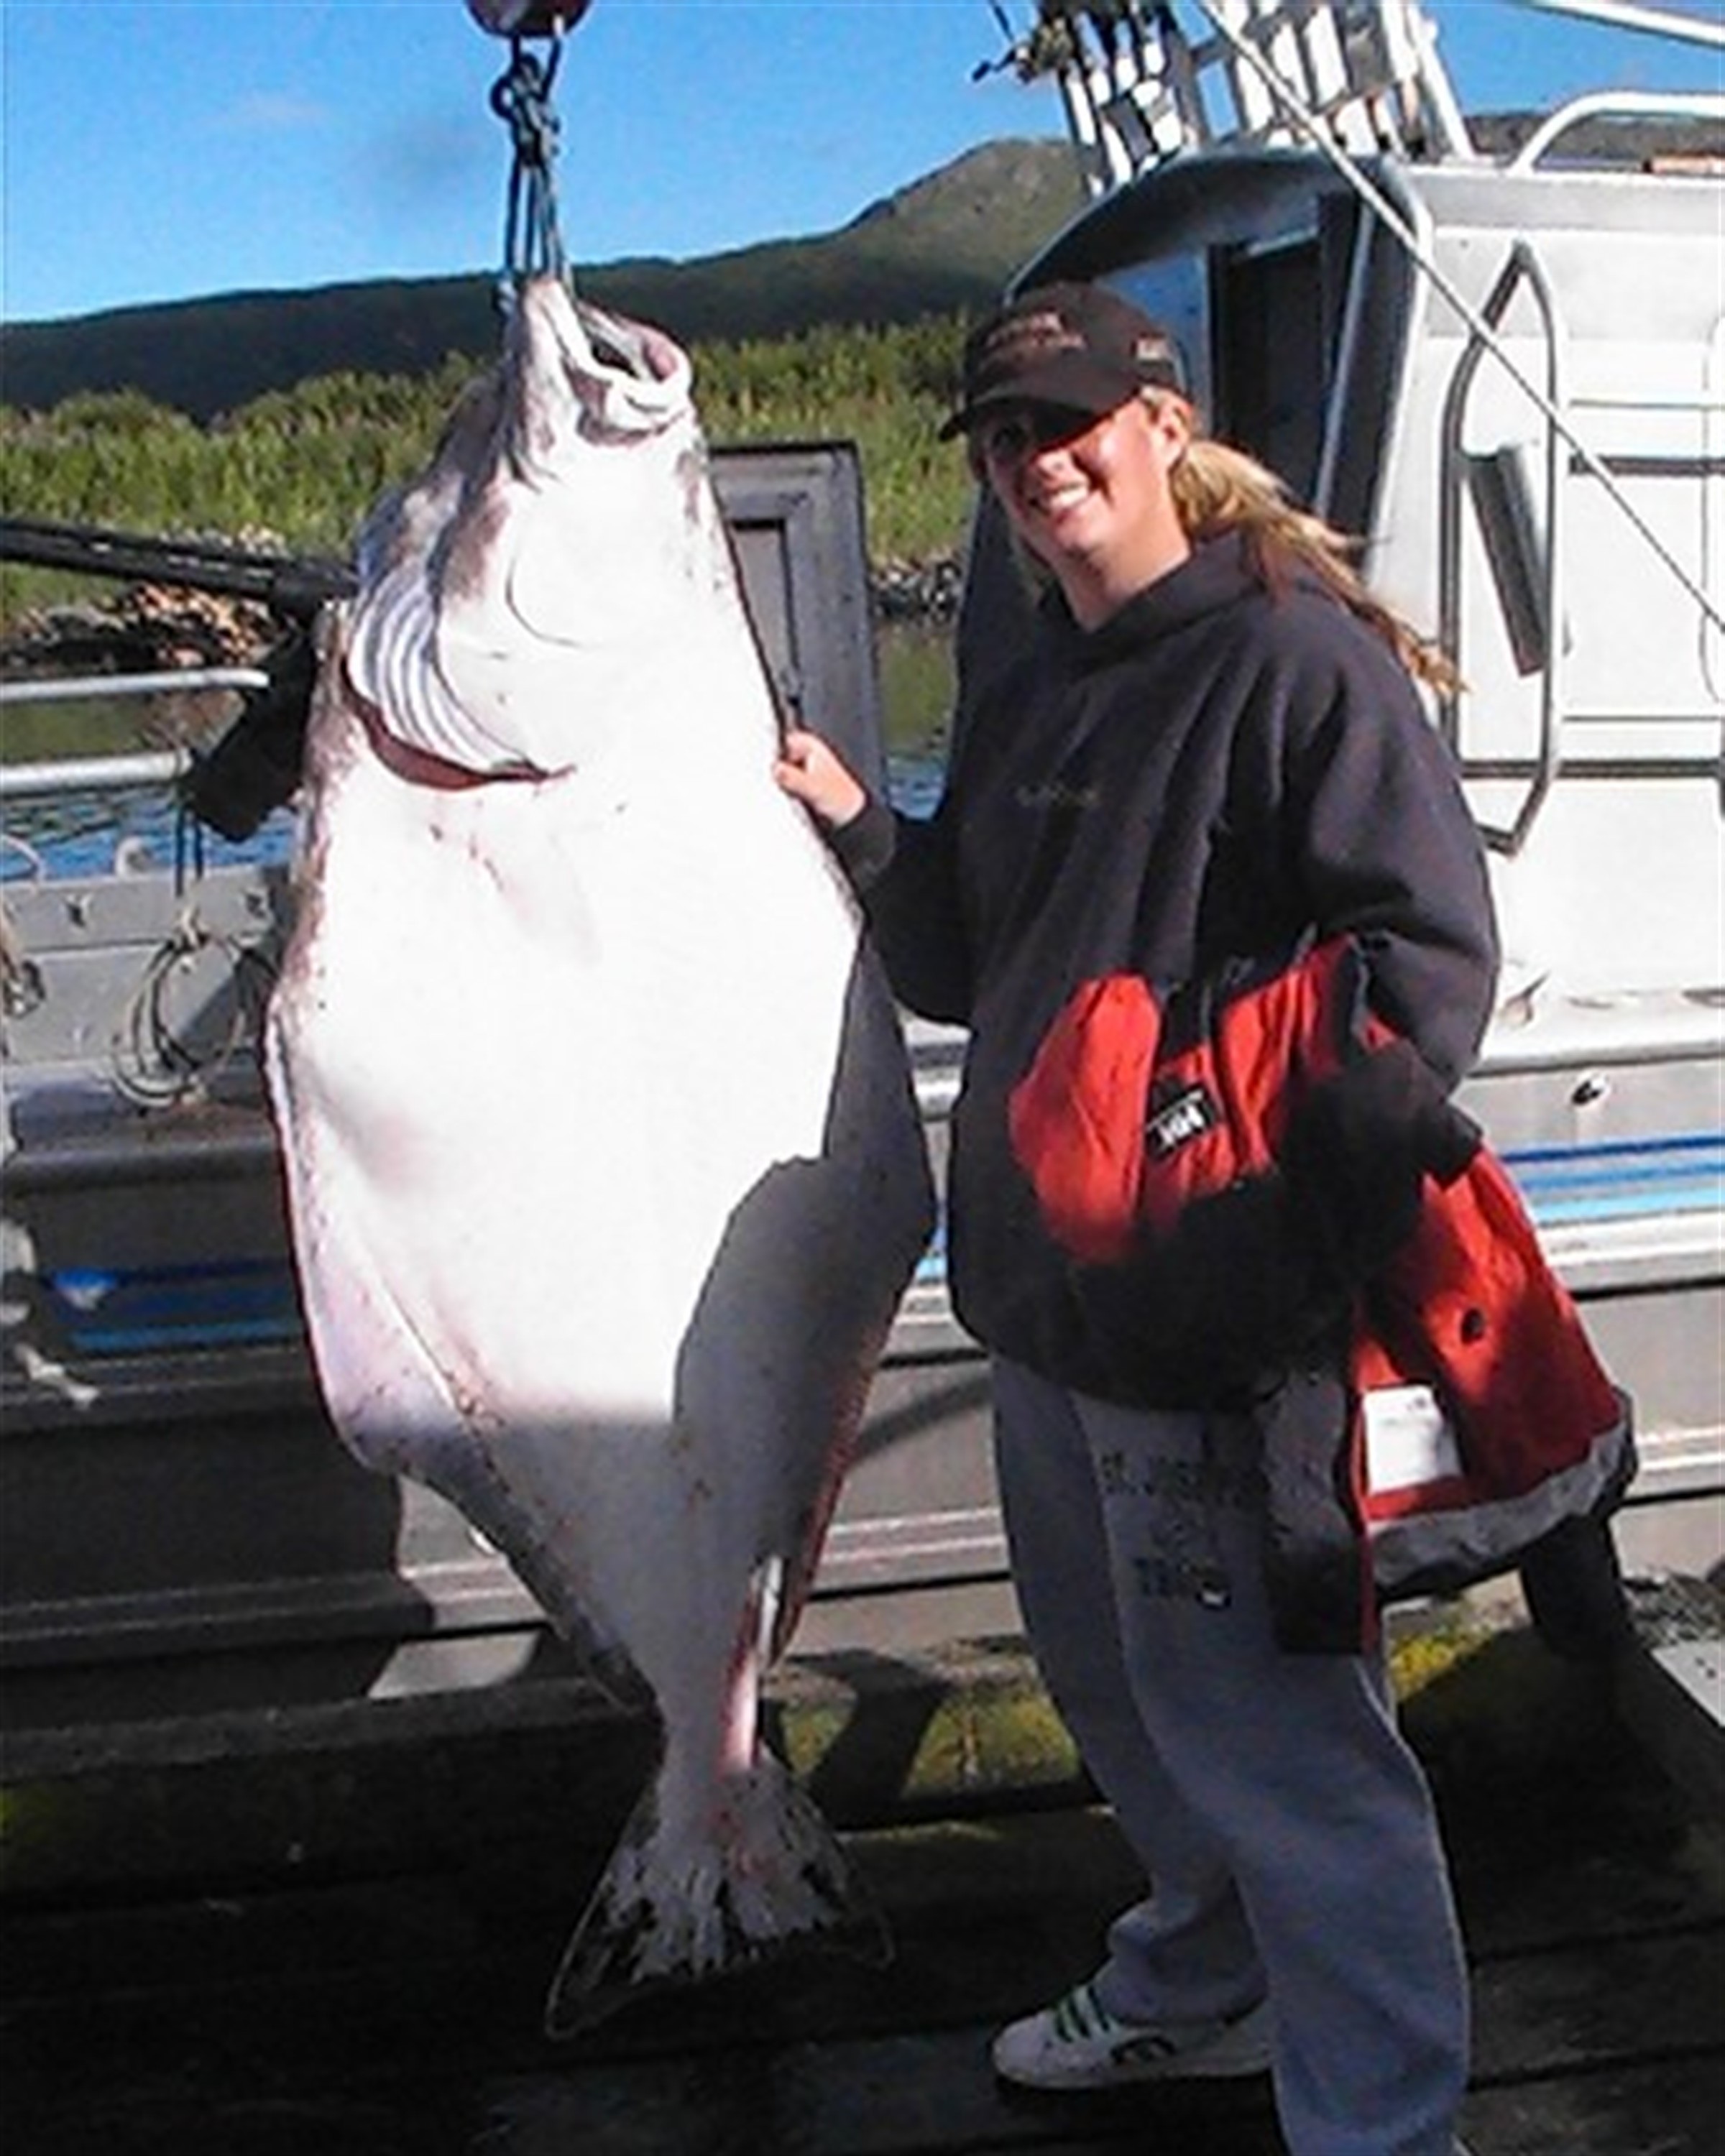 girl standing next to a caught halibut fish on a boat in Alaska